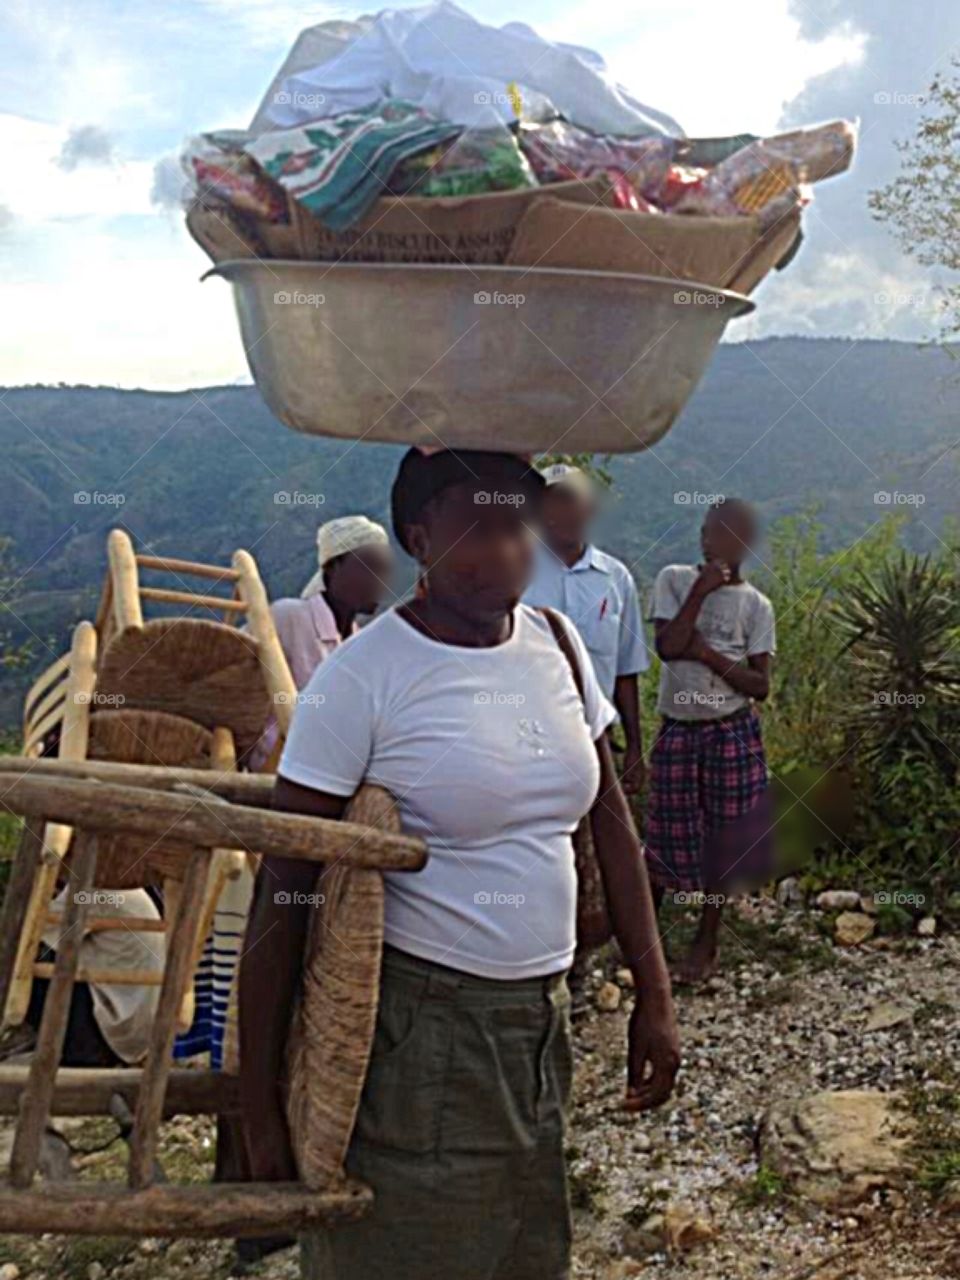 Haitian people working.  Women carry things on their heads in baskets.